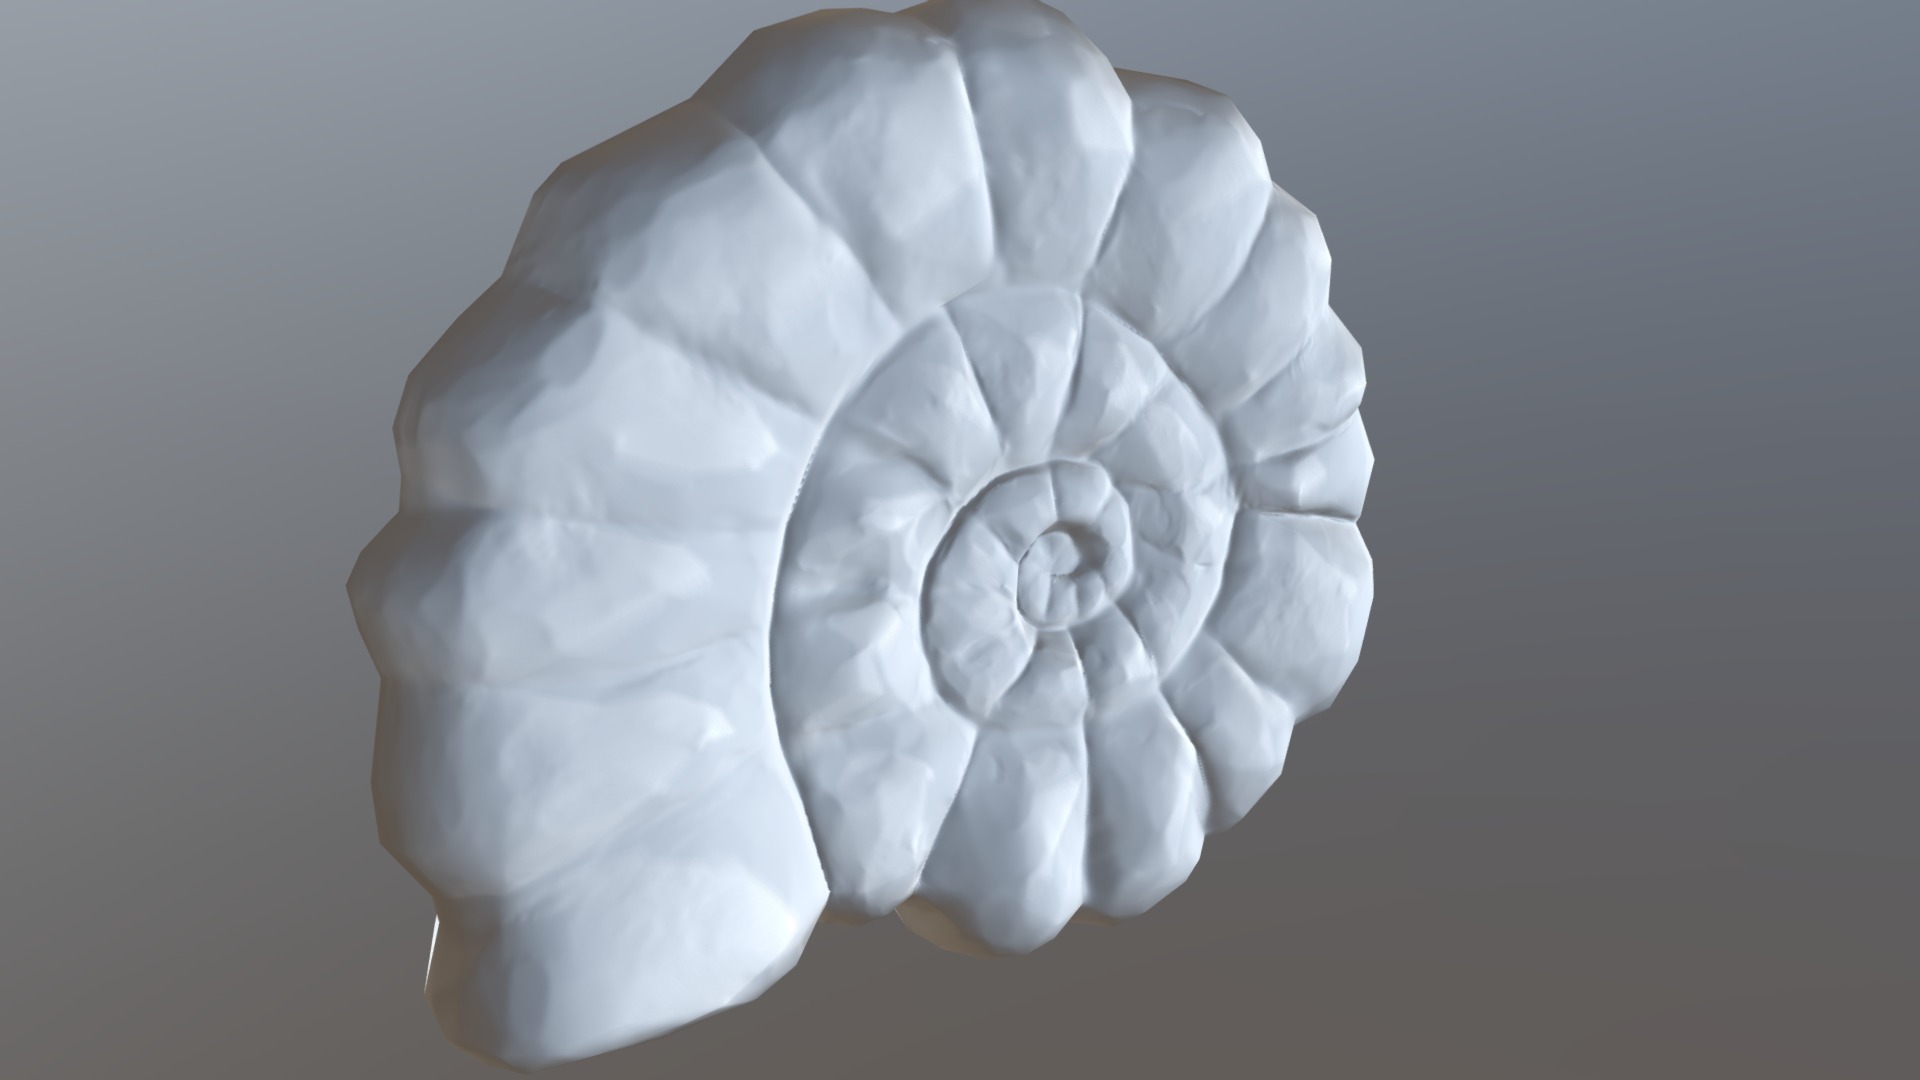 3D model Ammonite fossil - This is a 3D model of the Ammonite fossil. The 3D model is about a white flower with a black background.